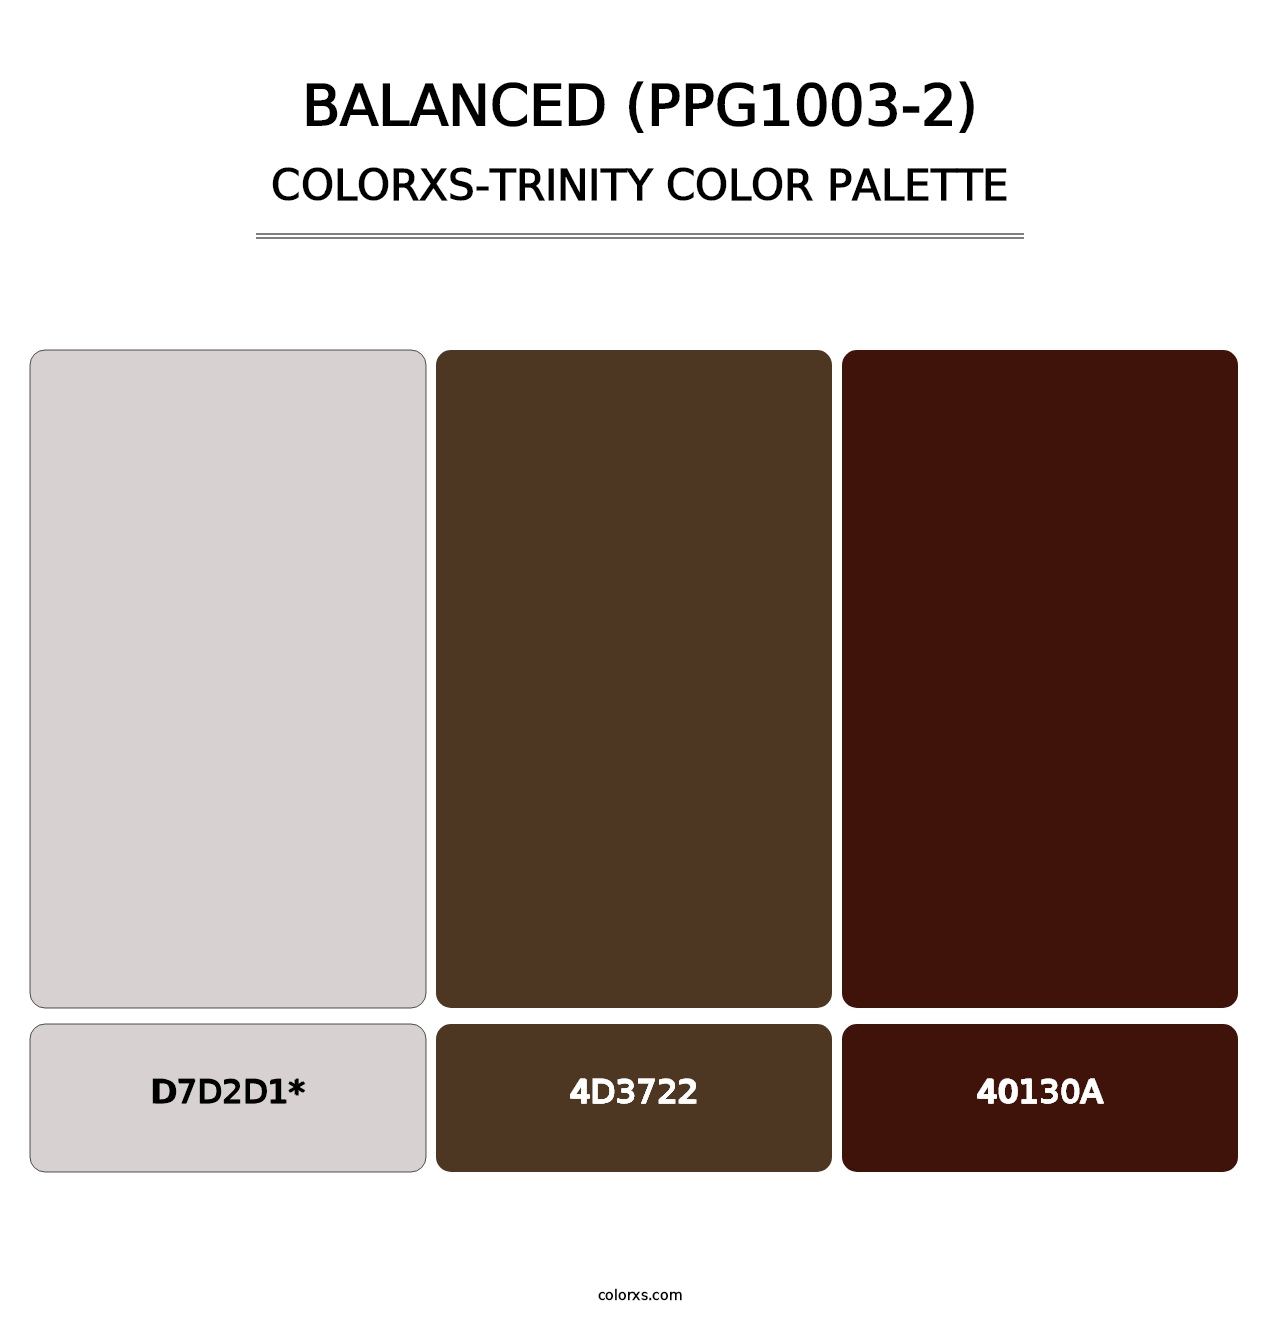 Balanced (PPG1003-2) - Colorxs Trinity Palette